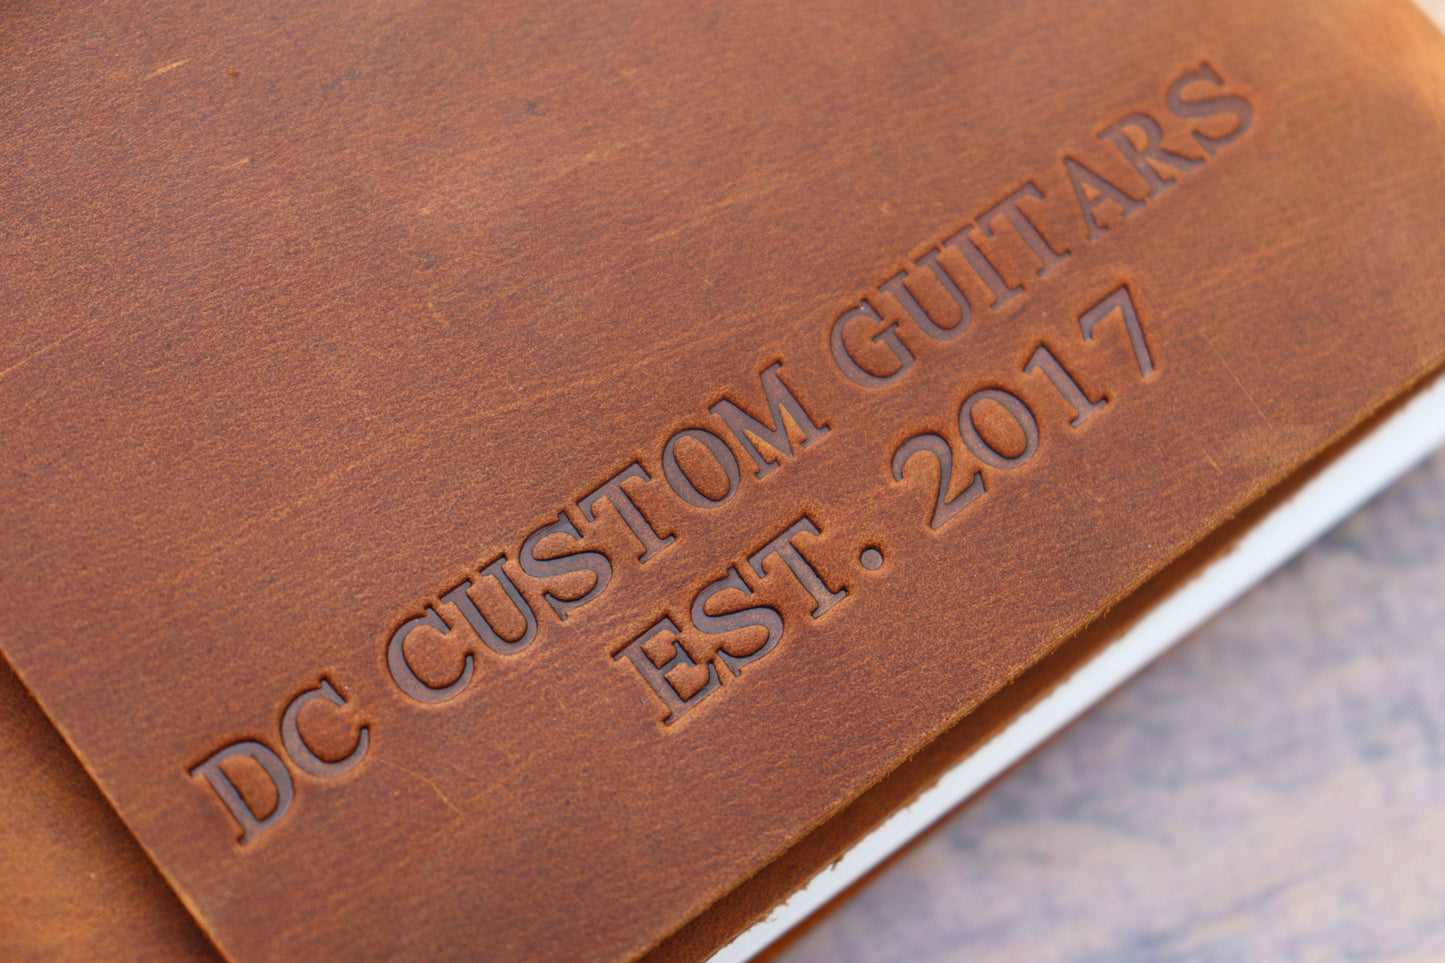 Add This Listing To Your Order For Additional Embossing On Your Journal Cover, Personalization, Engraving, Genuine Full Grain Leather